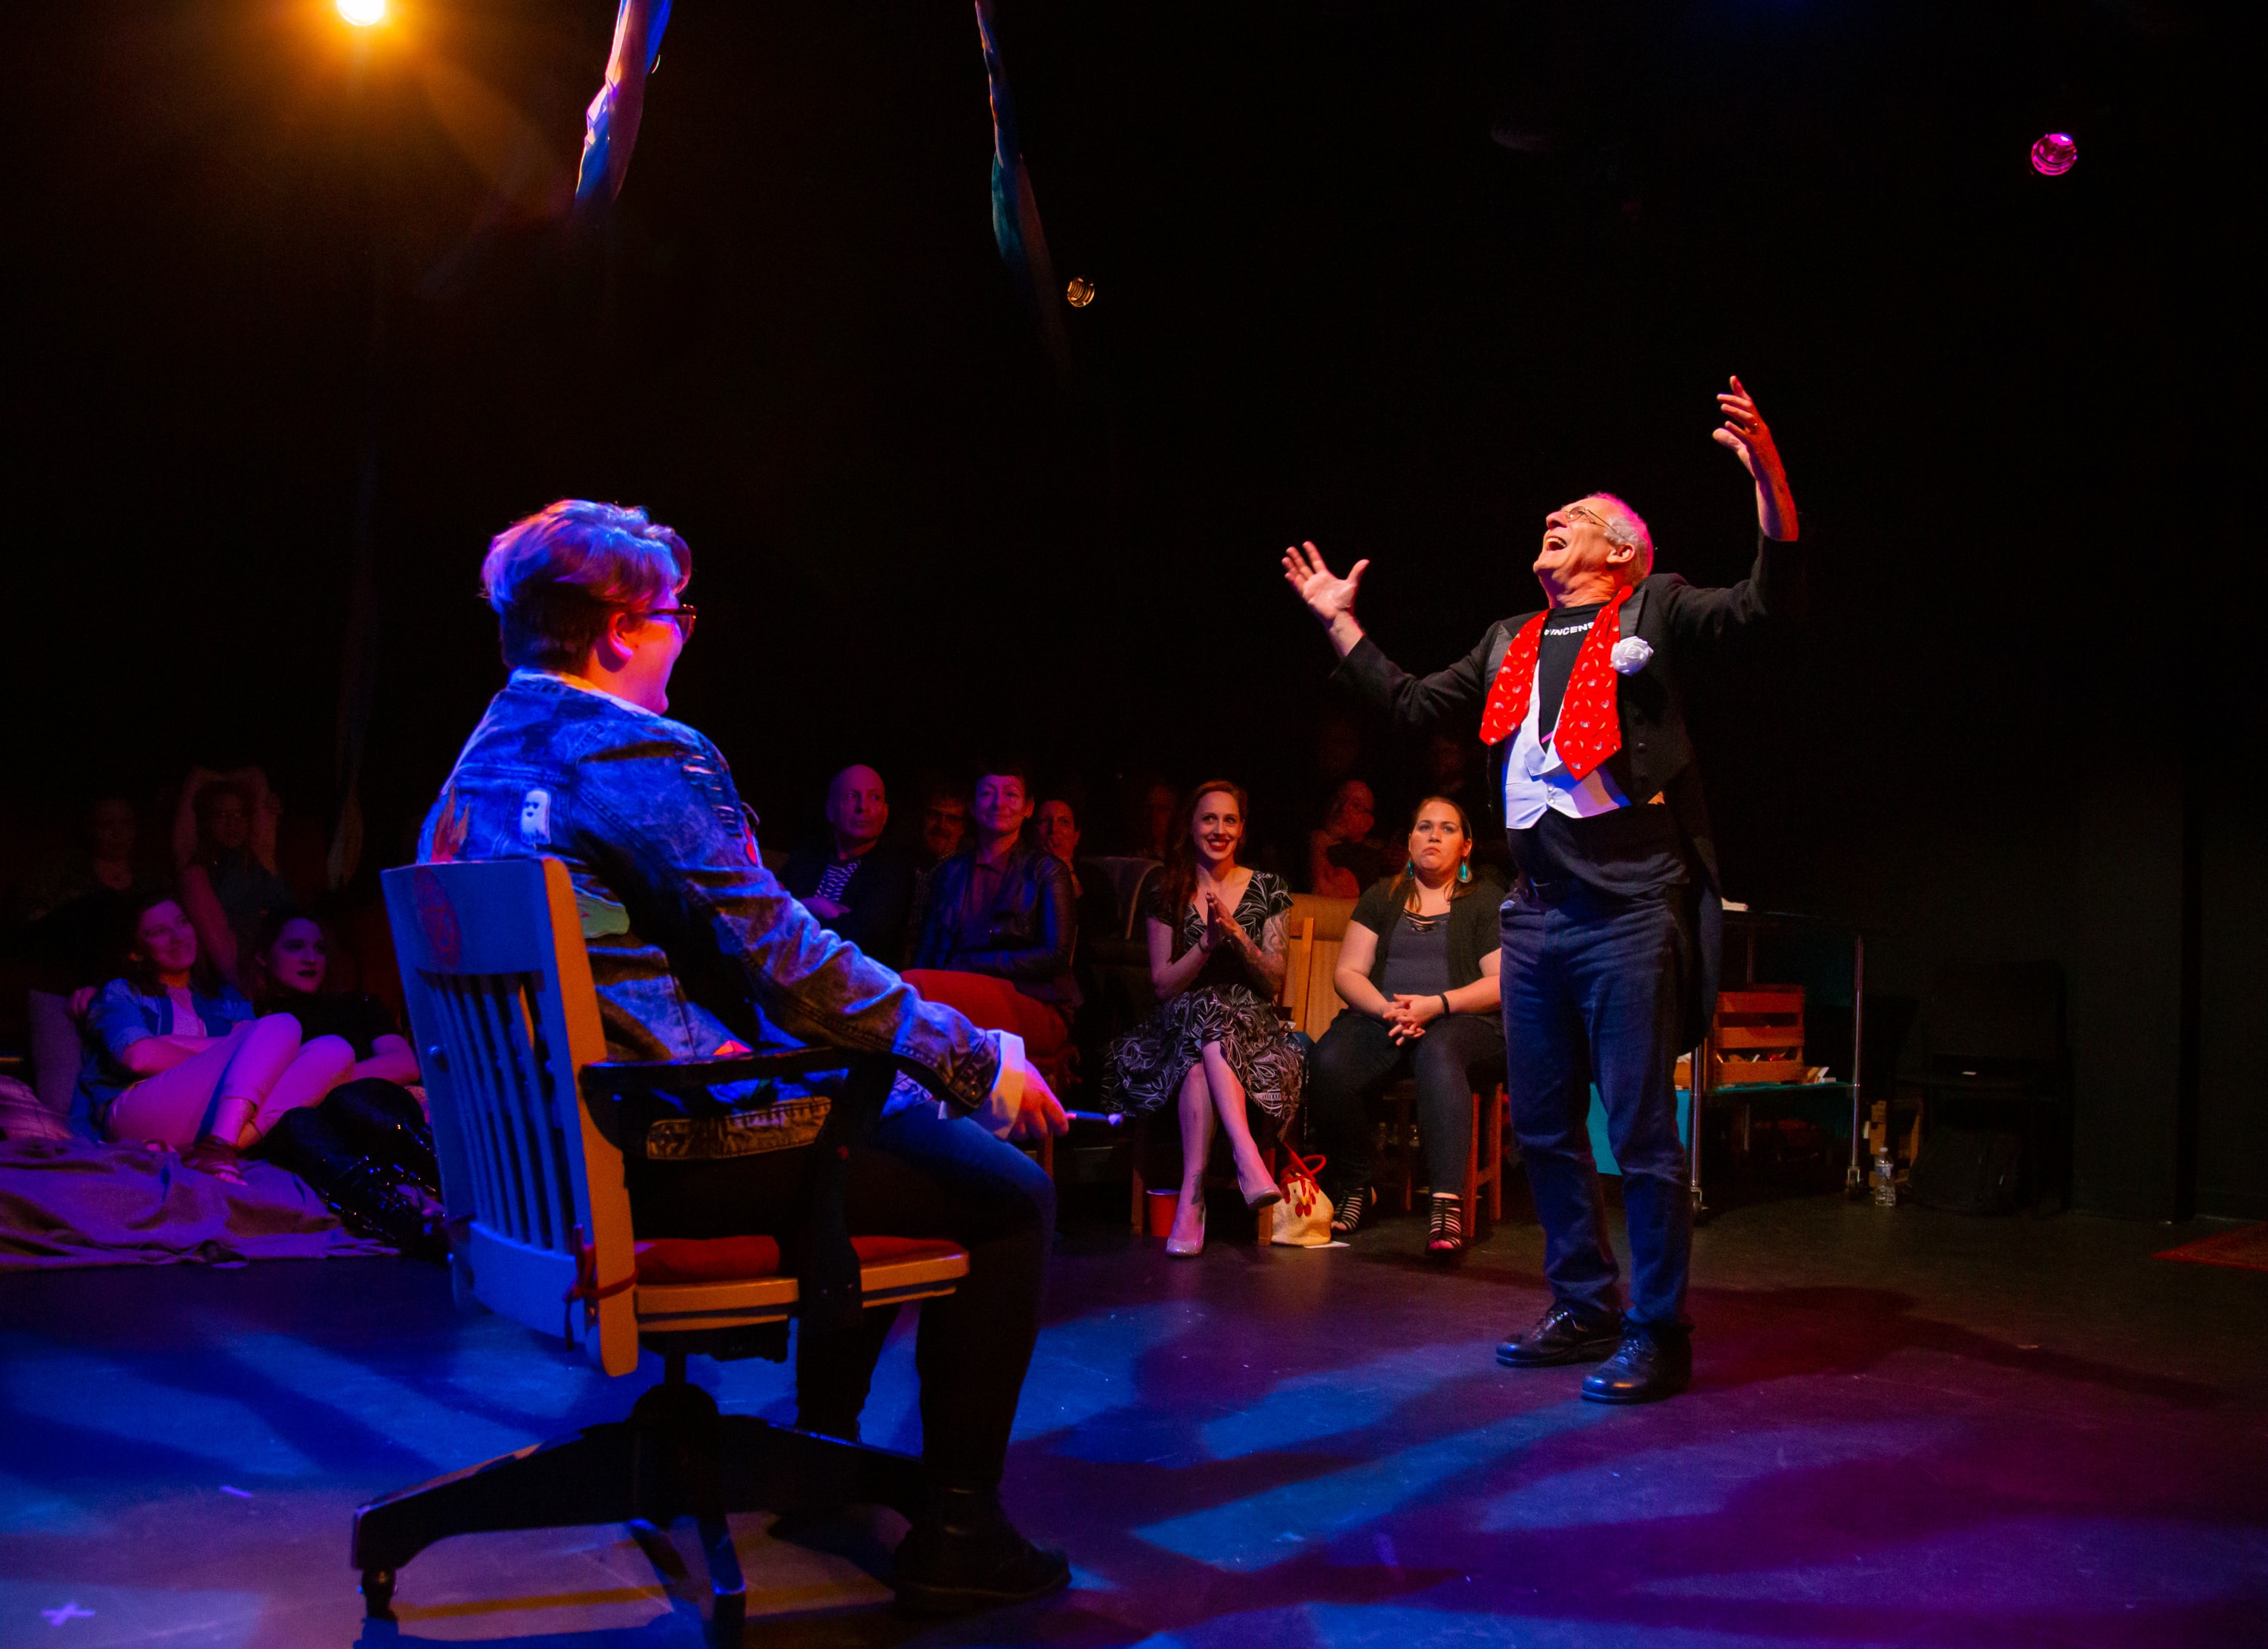 David S Kessler, performing Justice, in 'The Tarot Reading (V).' Photo by Ryan Maxwell Photography.